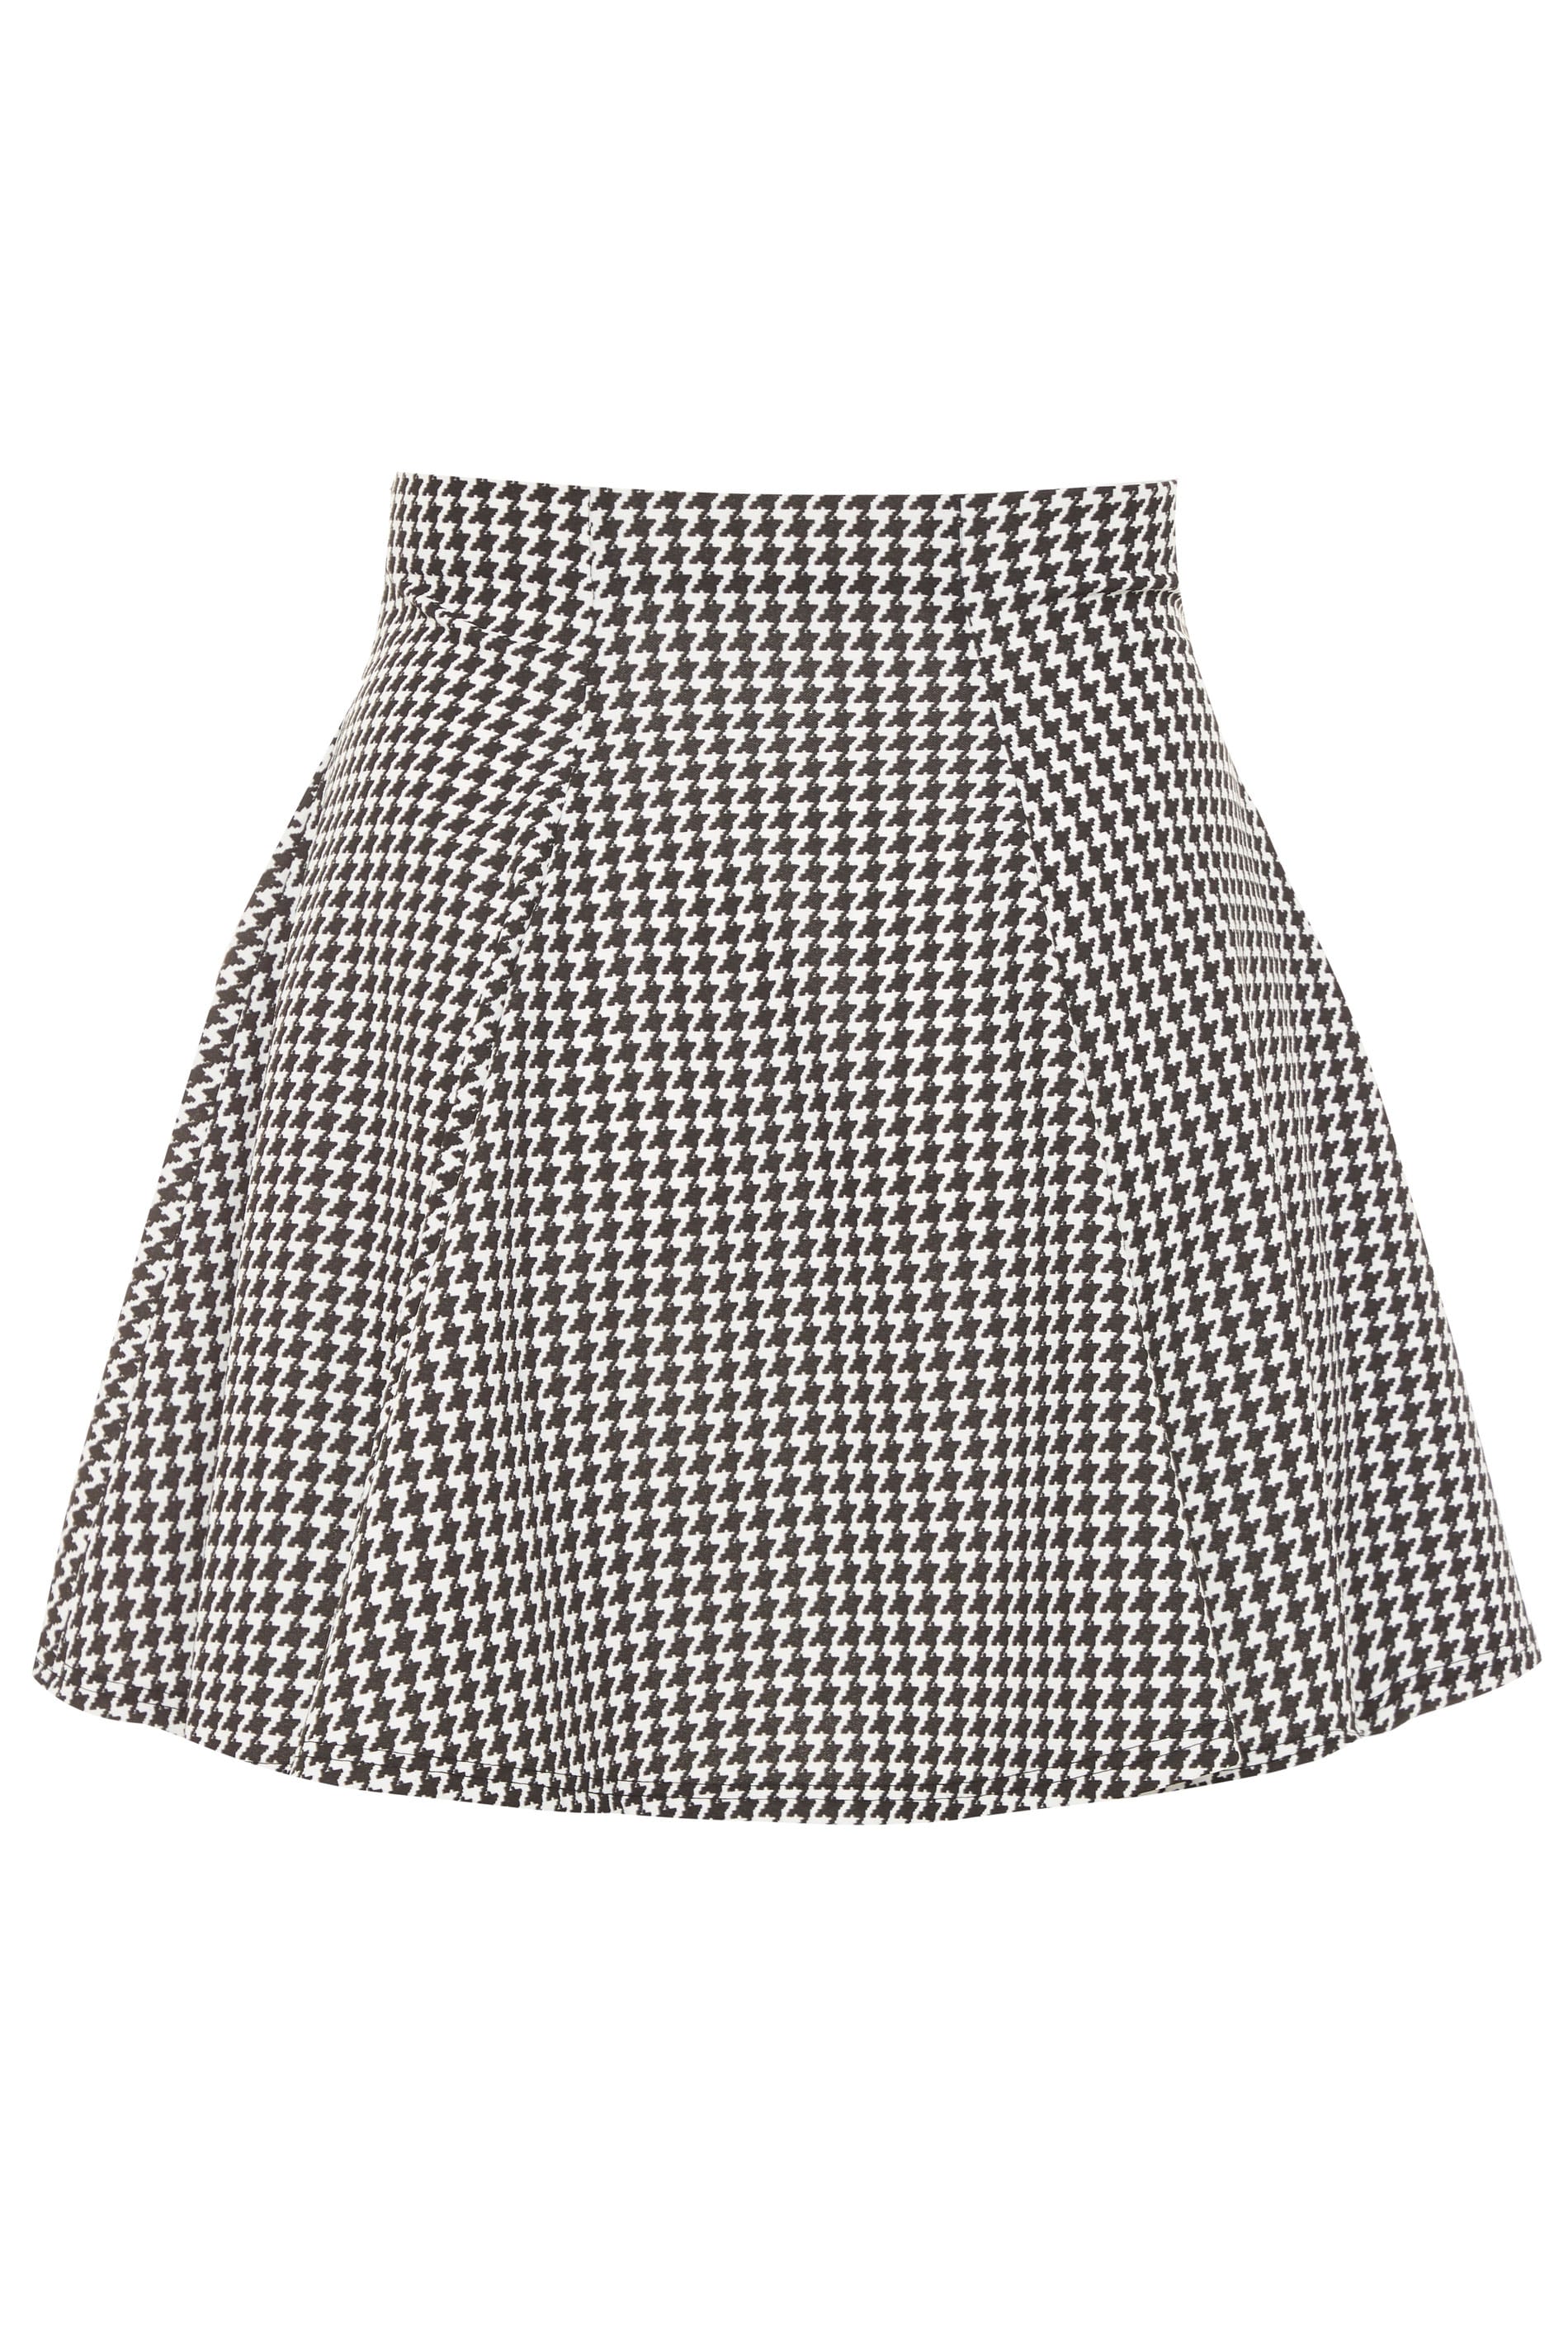 LIMITED COLLECTION Black & White Dogtooth Skater Skirt | Yours Clothing